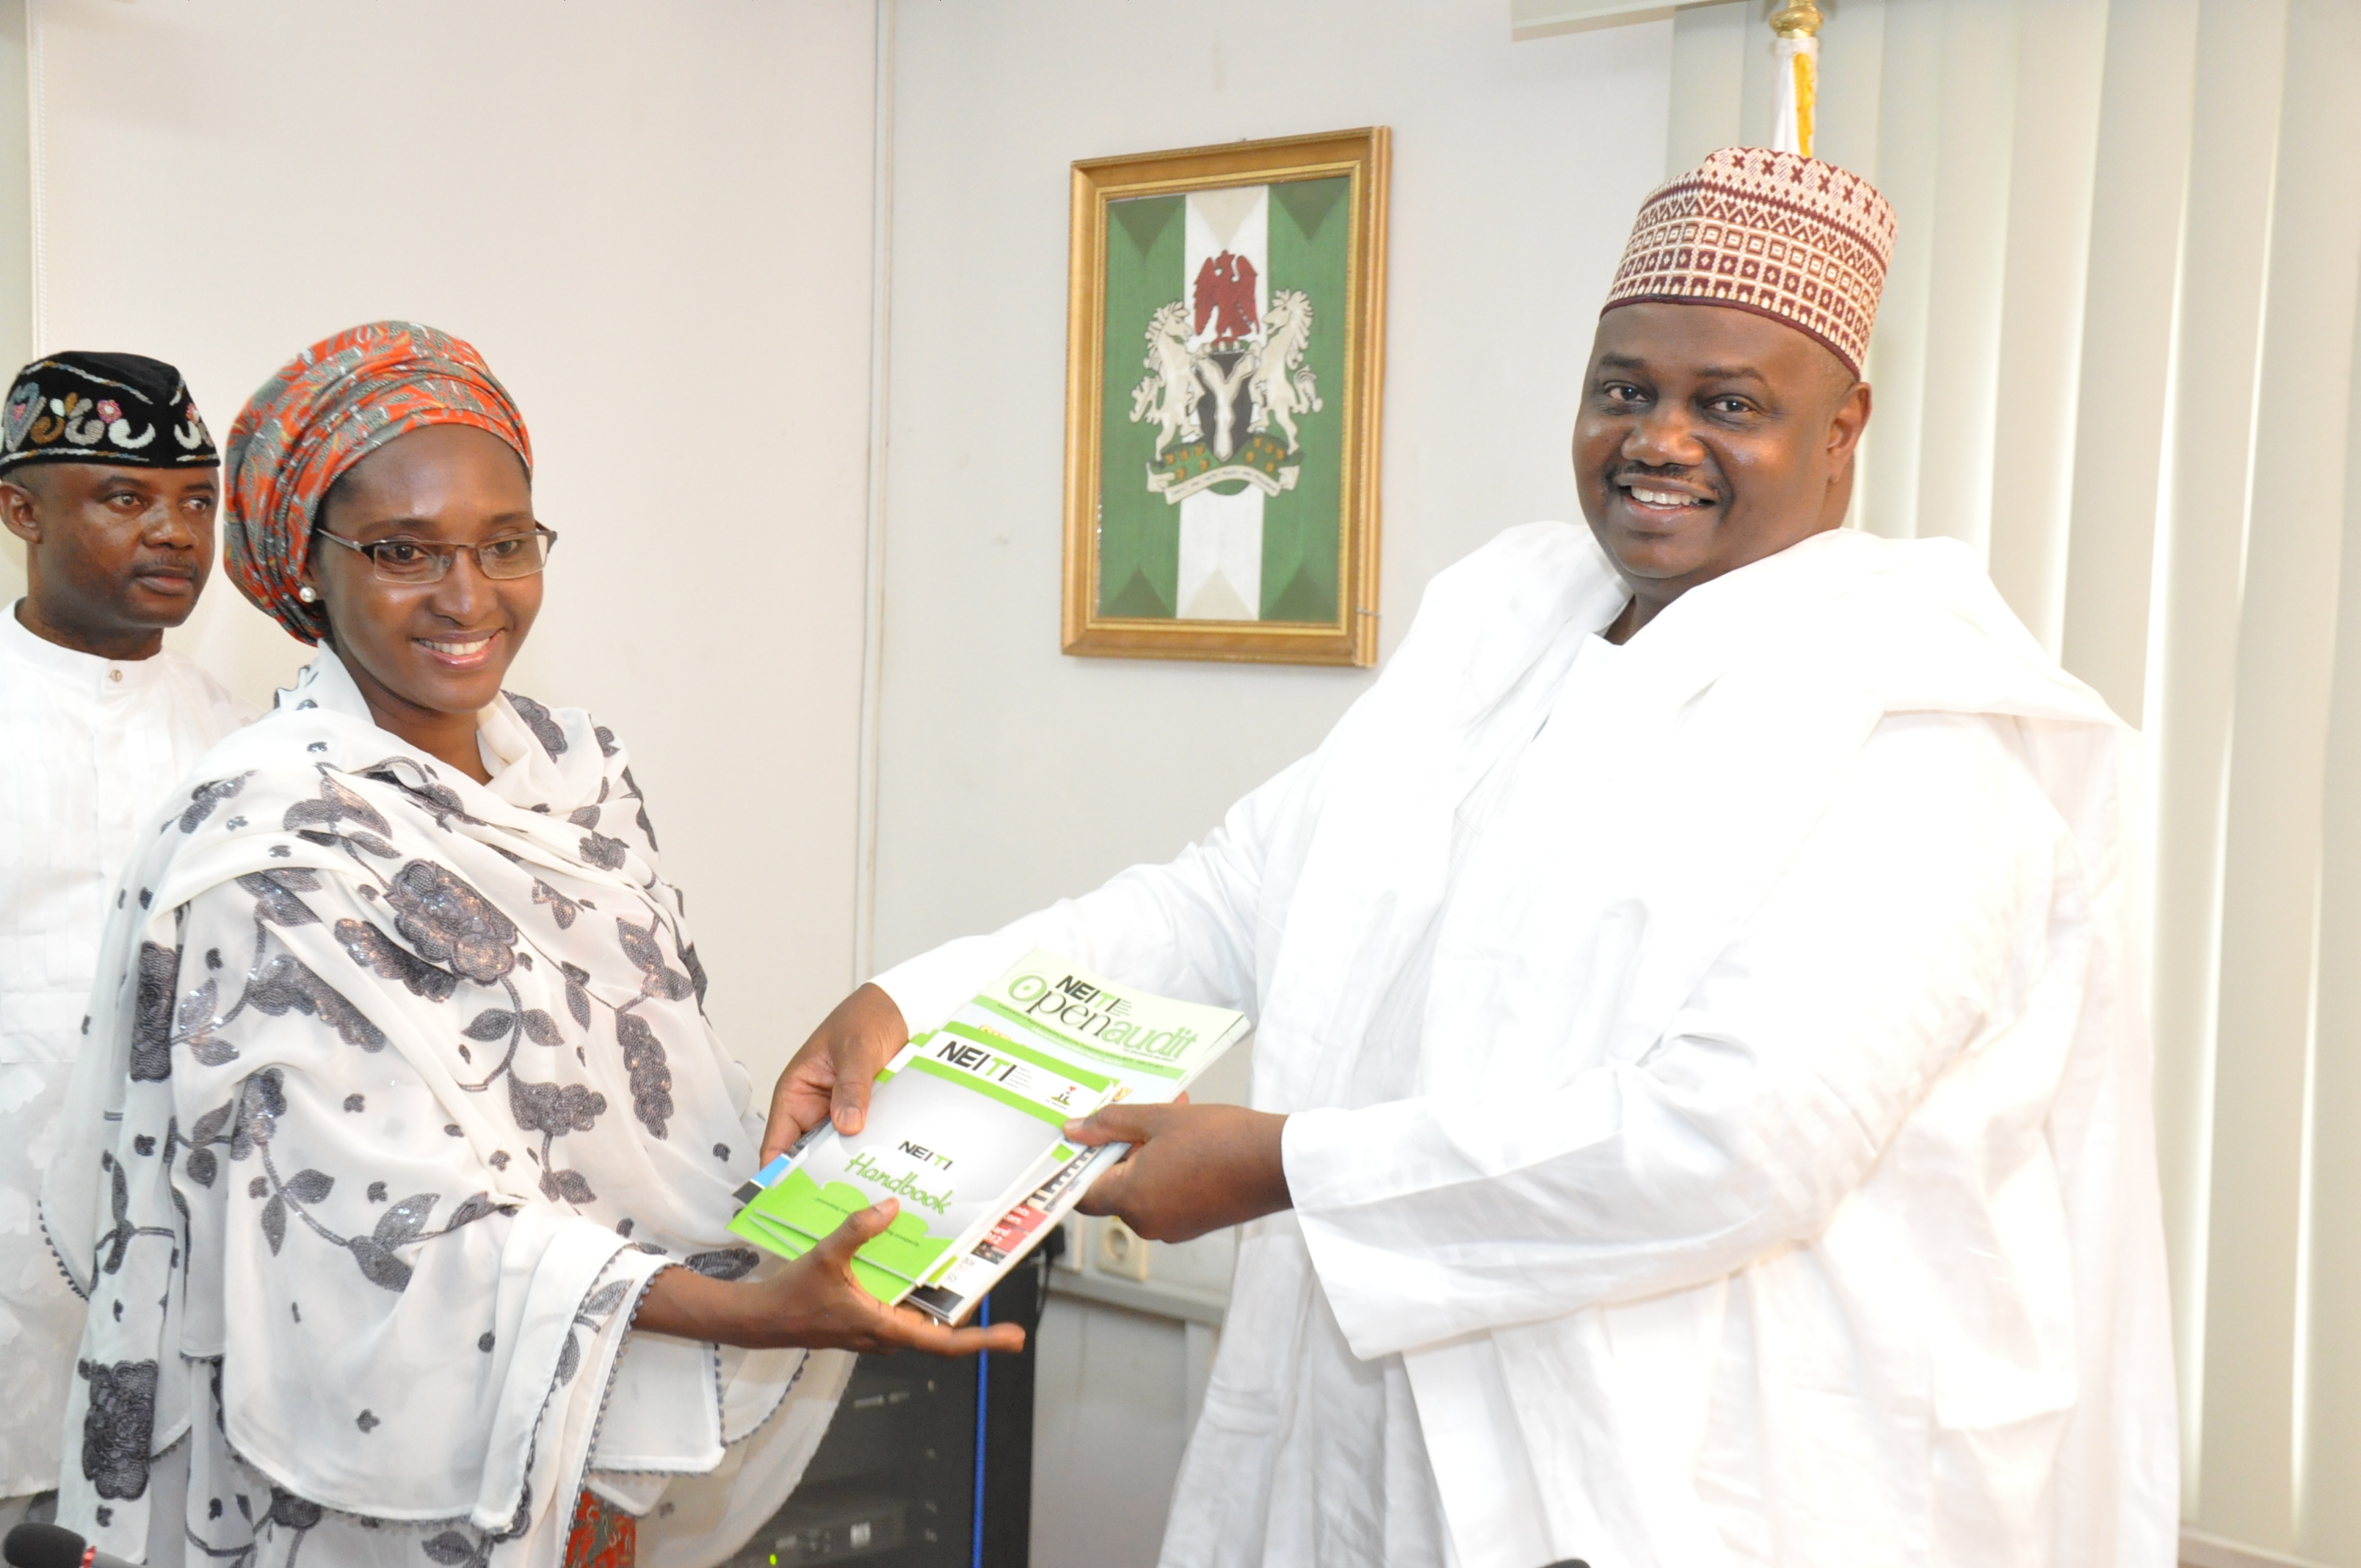 Ibrahim Lamorde, Executive Chairman, EFCC receiving publications from the Executive Secretary of the Nigerian Extractive Industries Transparency Initiative, Zainab Ahmed who led a delegation of members of NEITI’s Management team during a courtesy visit to the Commission’s Headquarters in Abuja, recently.